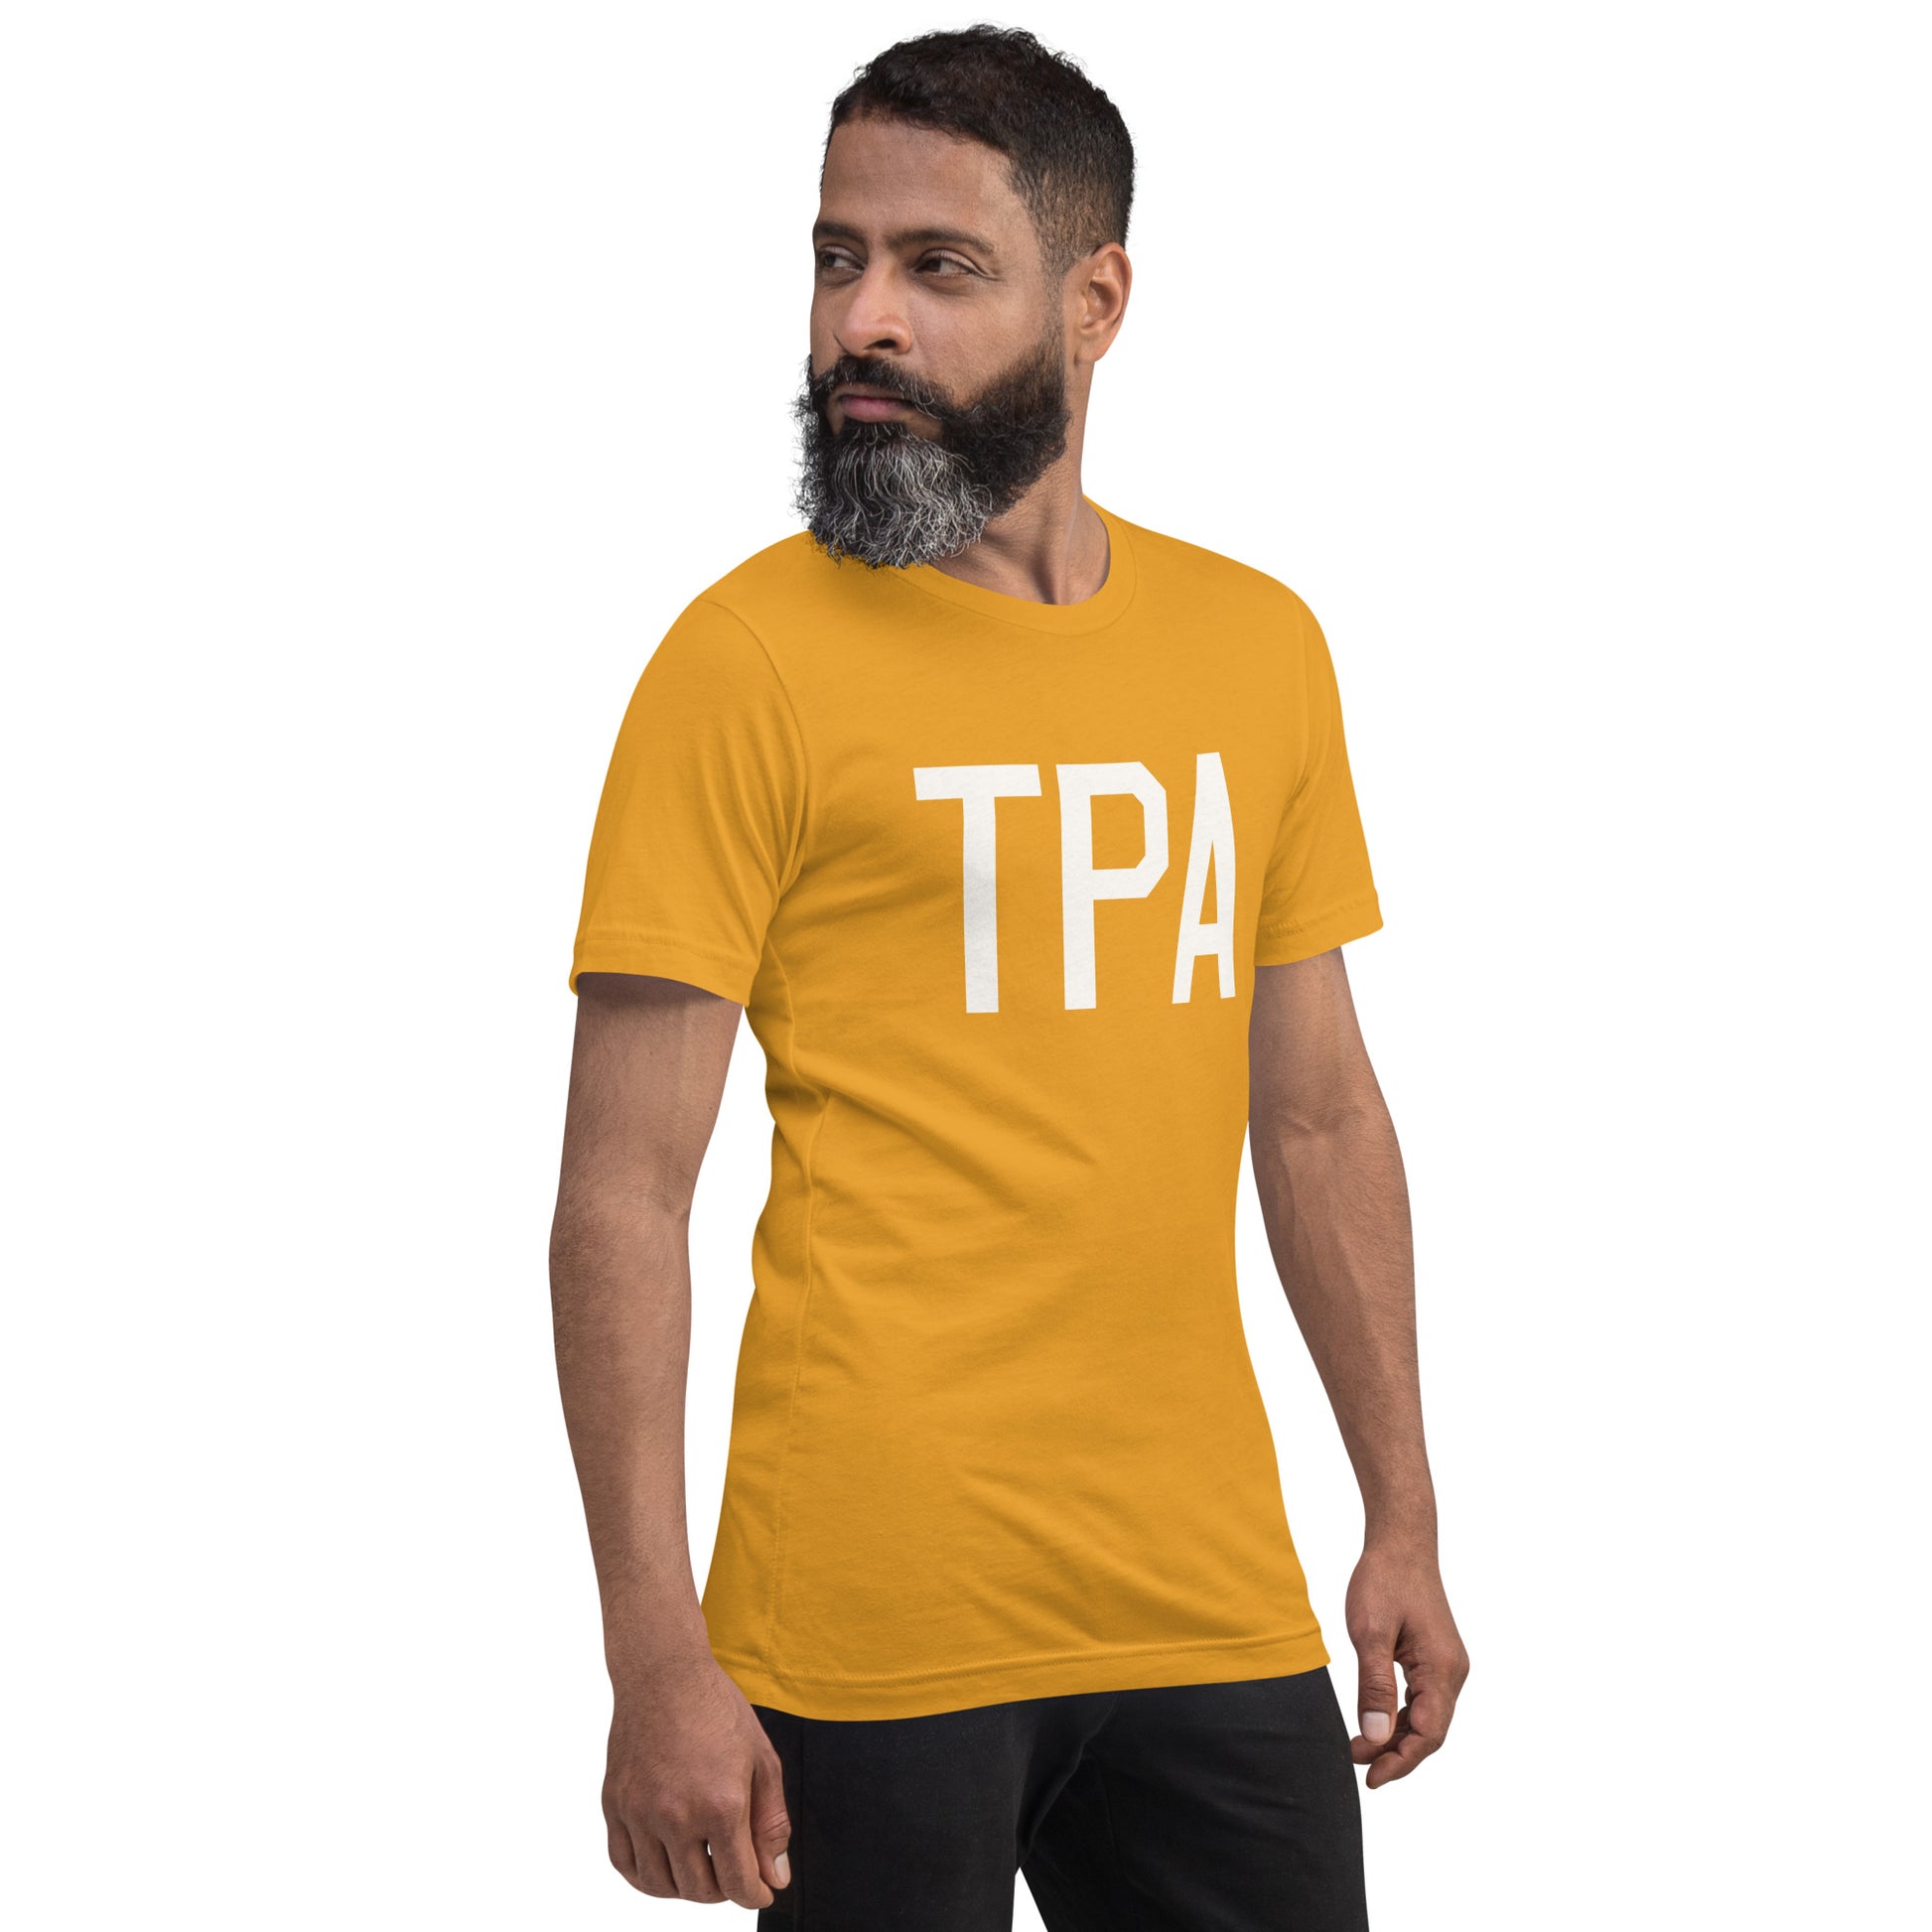 Airport Code T-Shirt - White Graphic • TPA Tampa • YHM Designs - Image 12